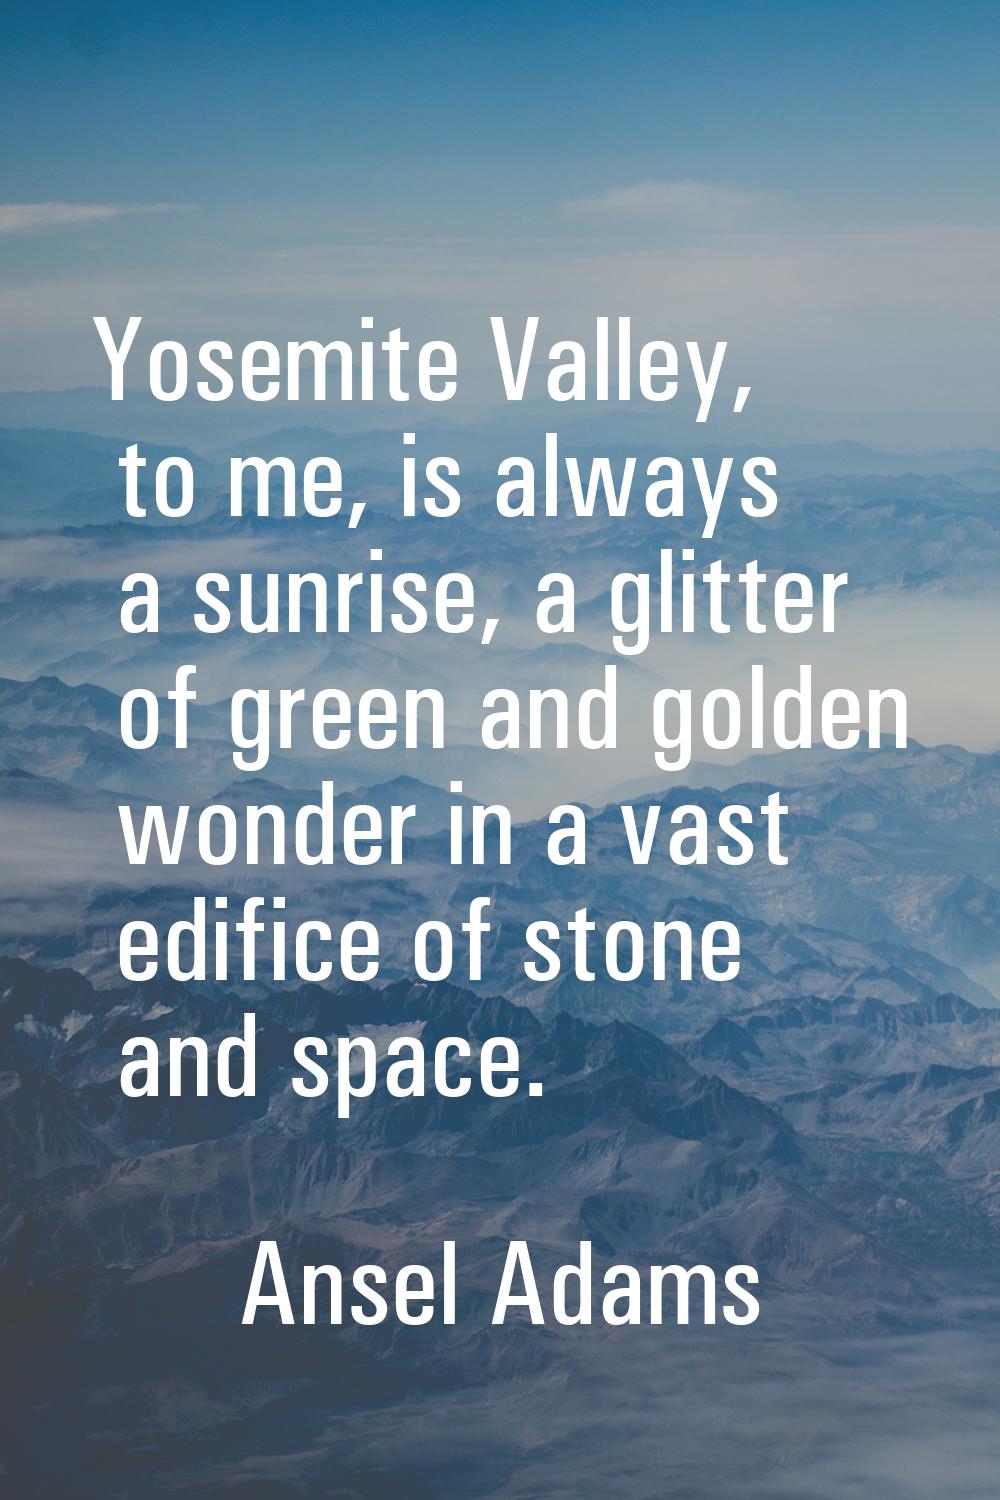 Yosemite Valley, to me, is always a sunrise, a glitter of green and golden wonder in a vast edifice